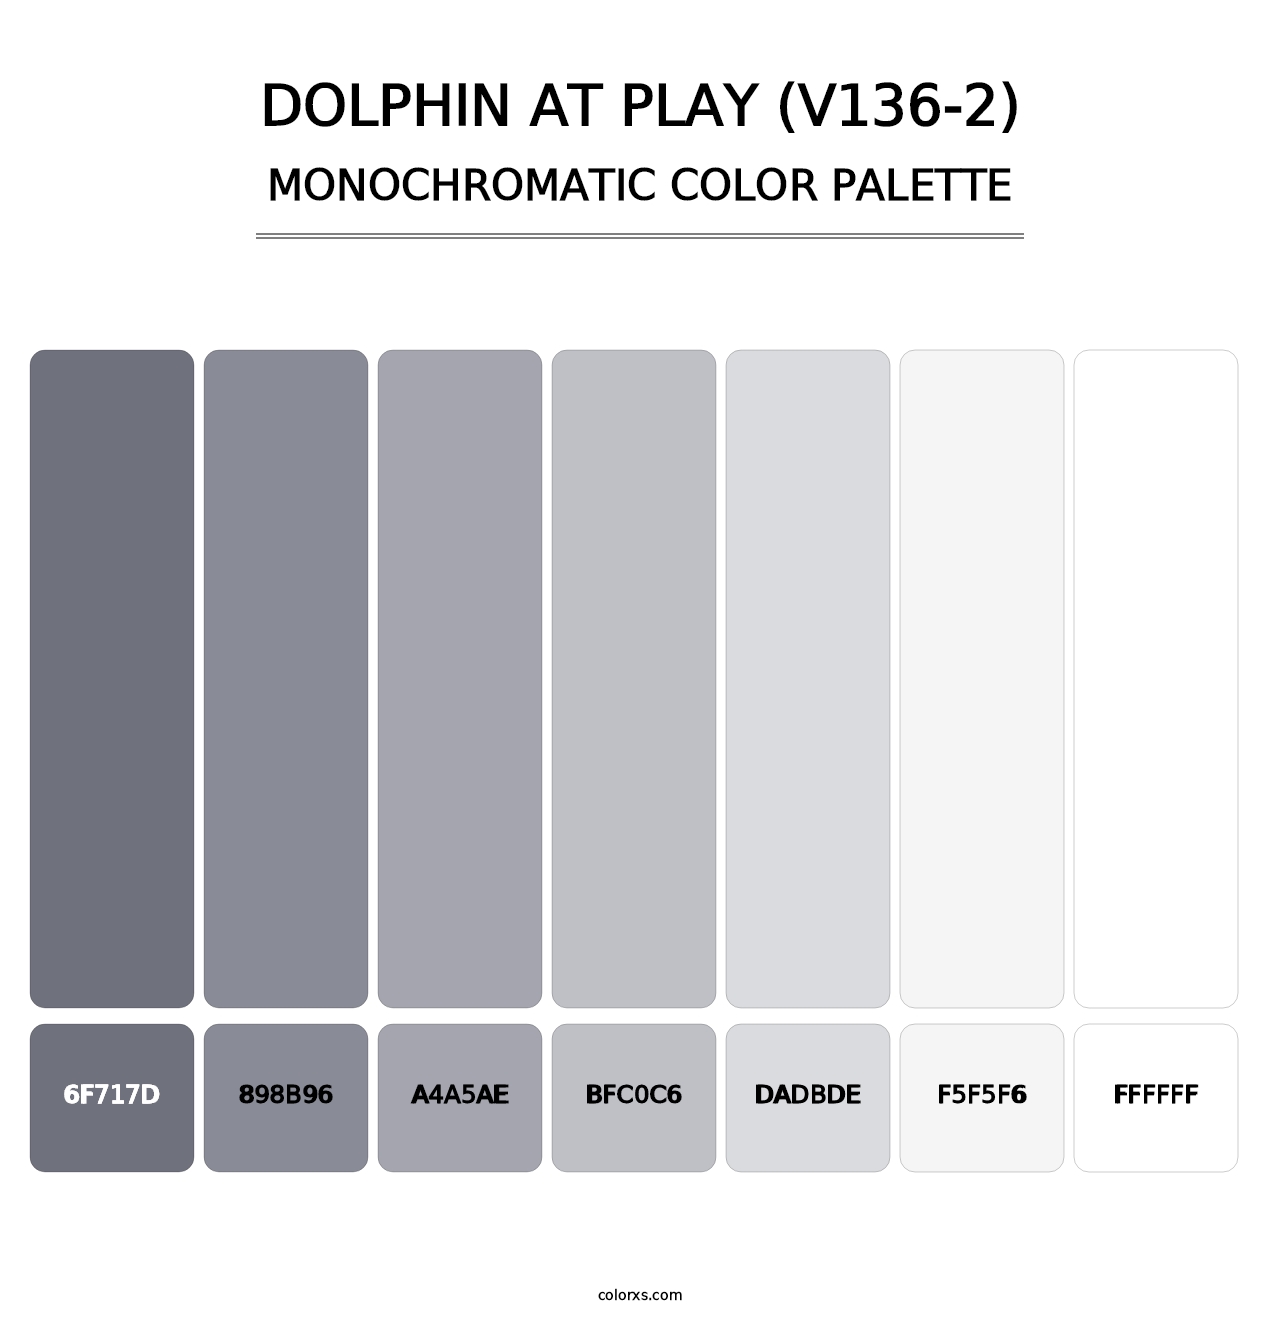 Dolphin at Play (V136-2) - Monochromatic Color Palette